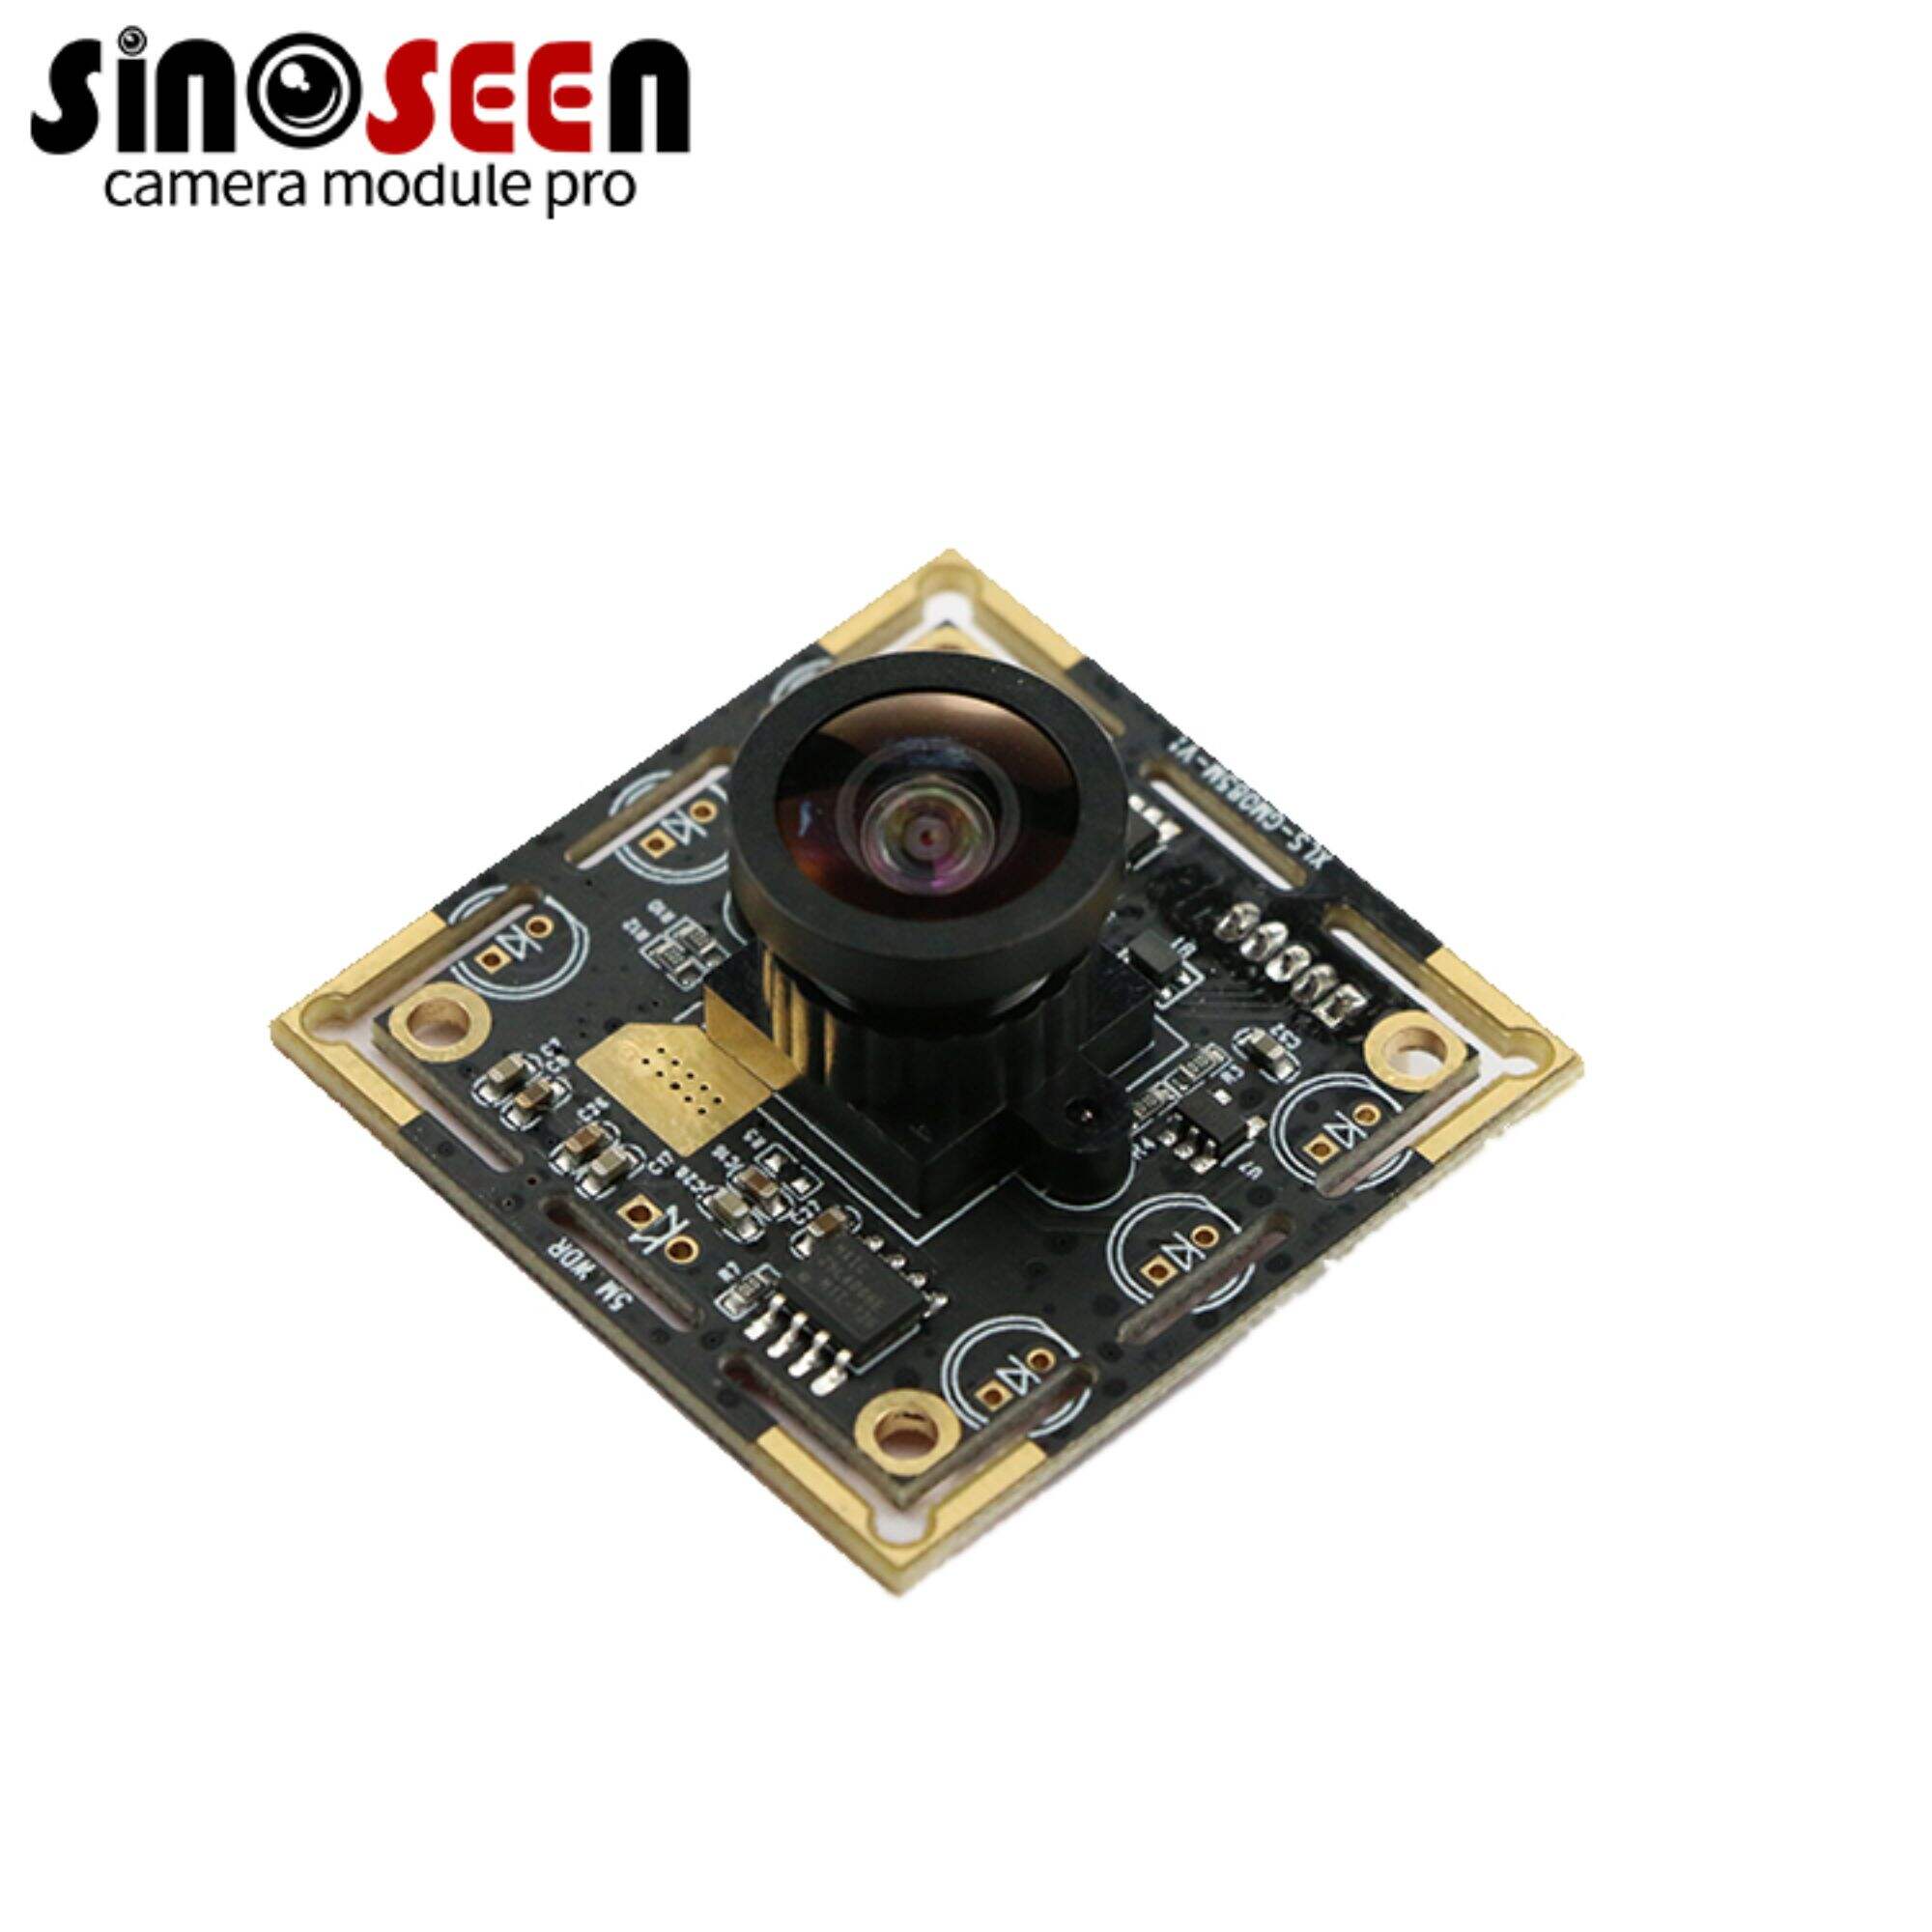 Raspberry Pi SONY IMX335 Sensor Night Vision Camera Module for Unmanned Aerial Vehicles